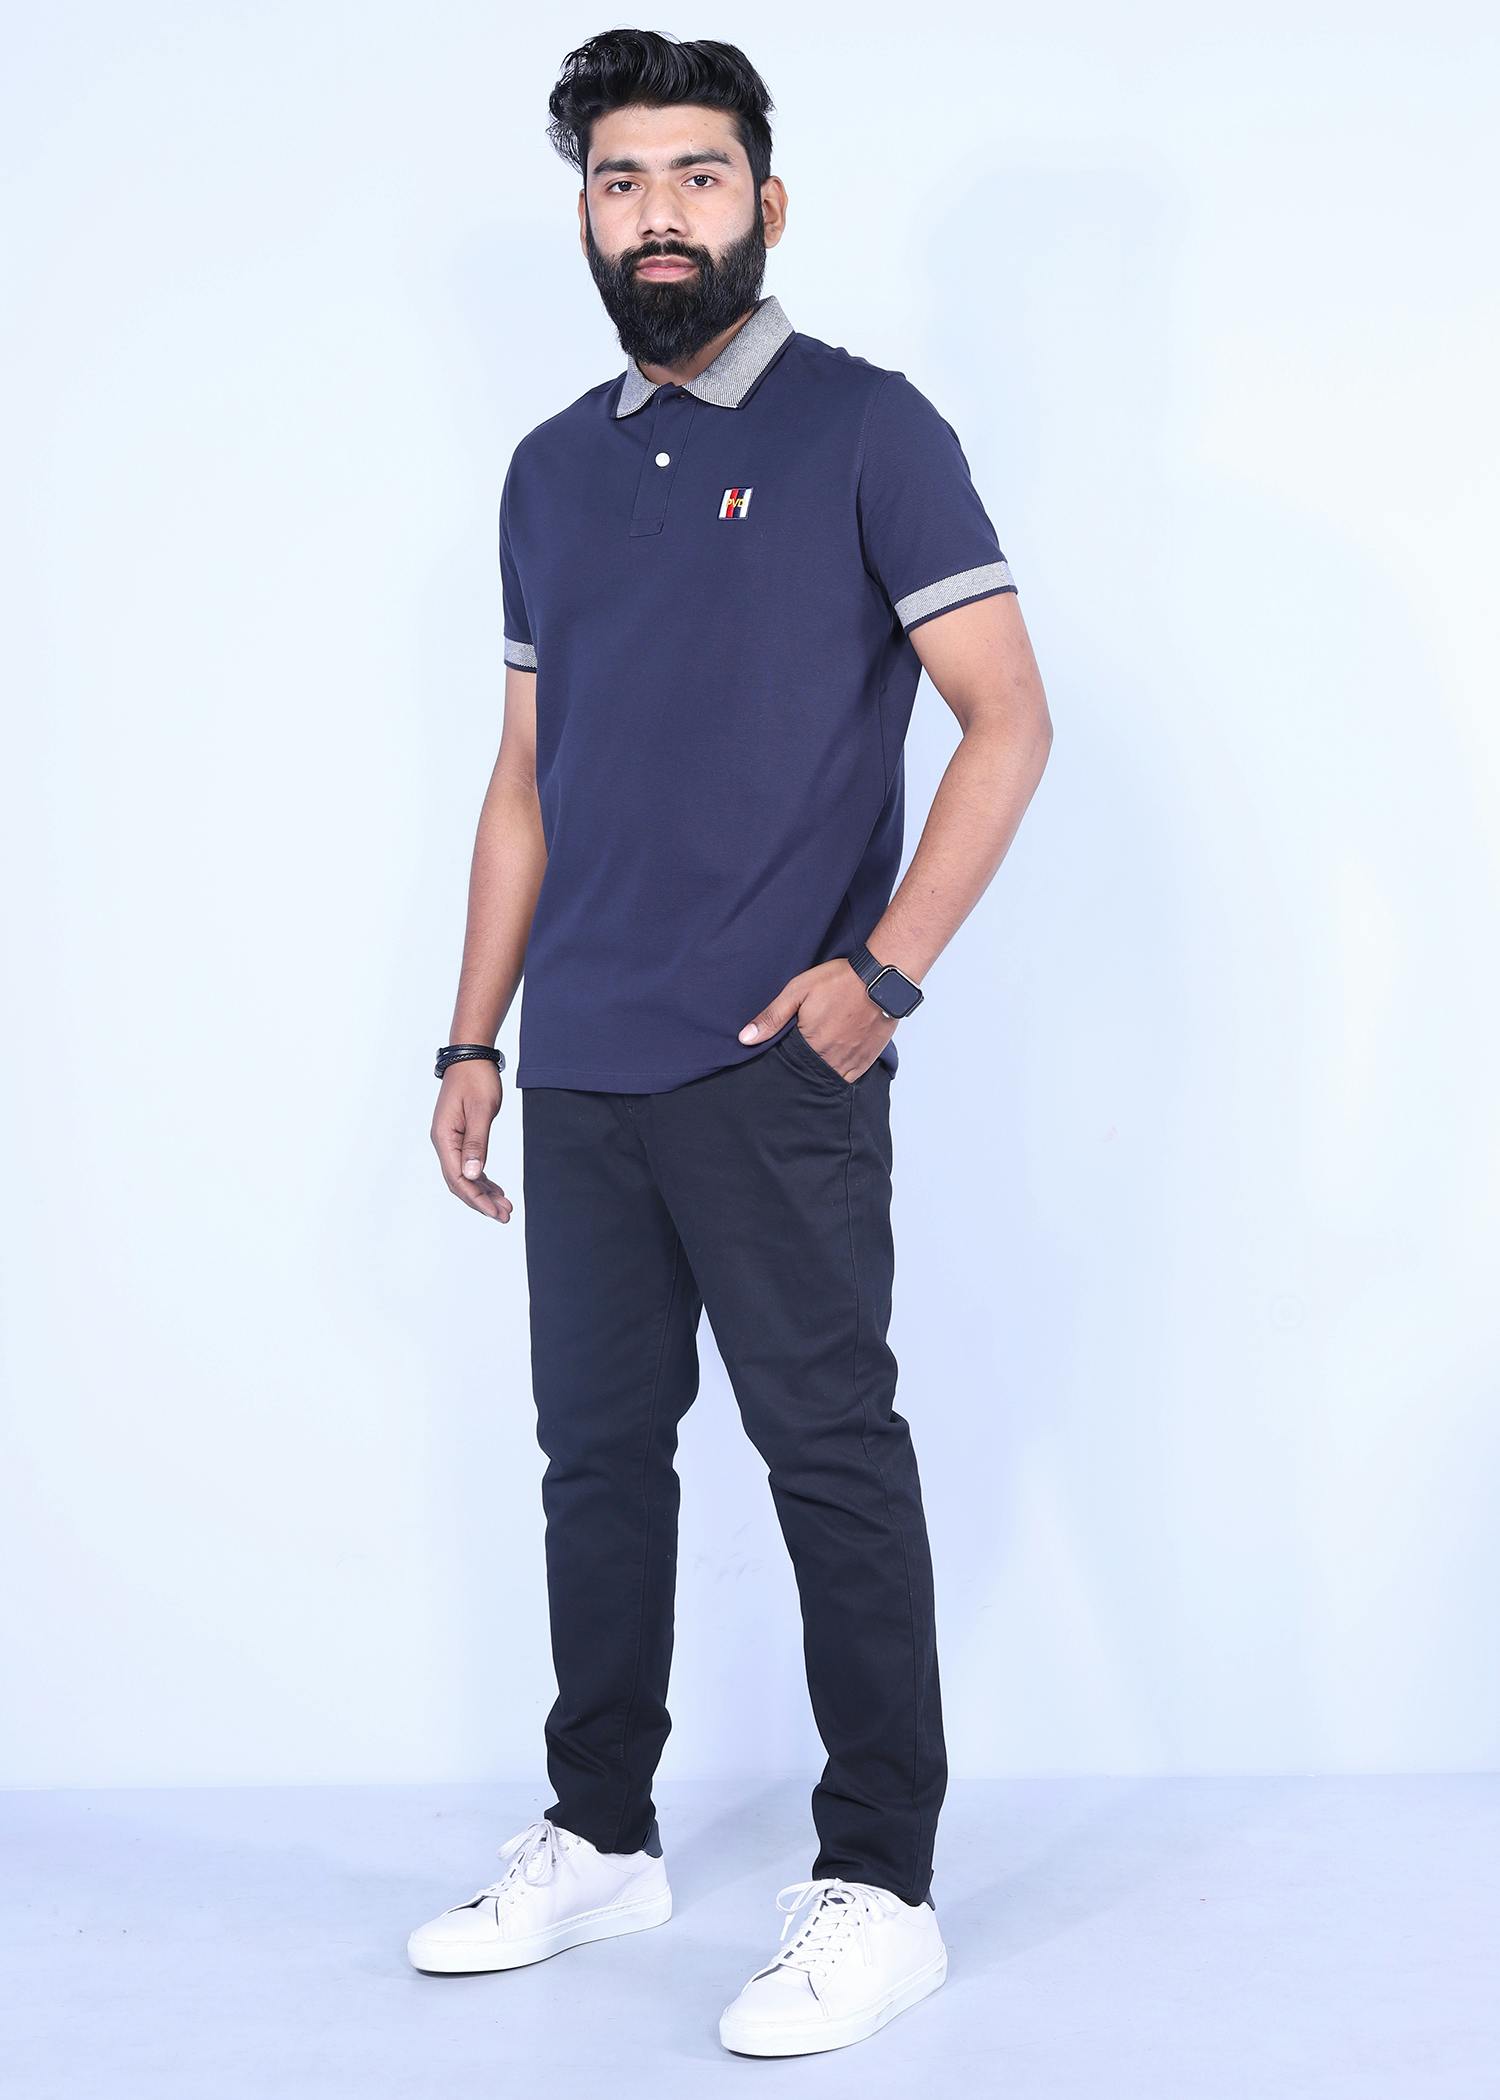 nightingale iii polo navy color full side view